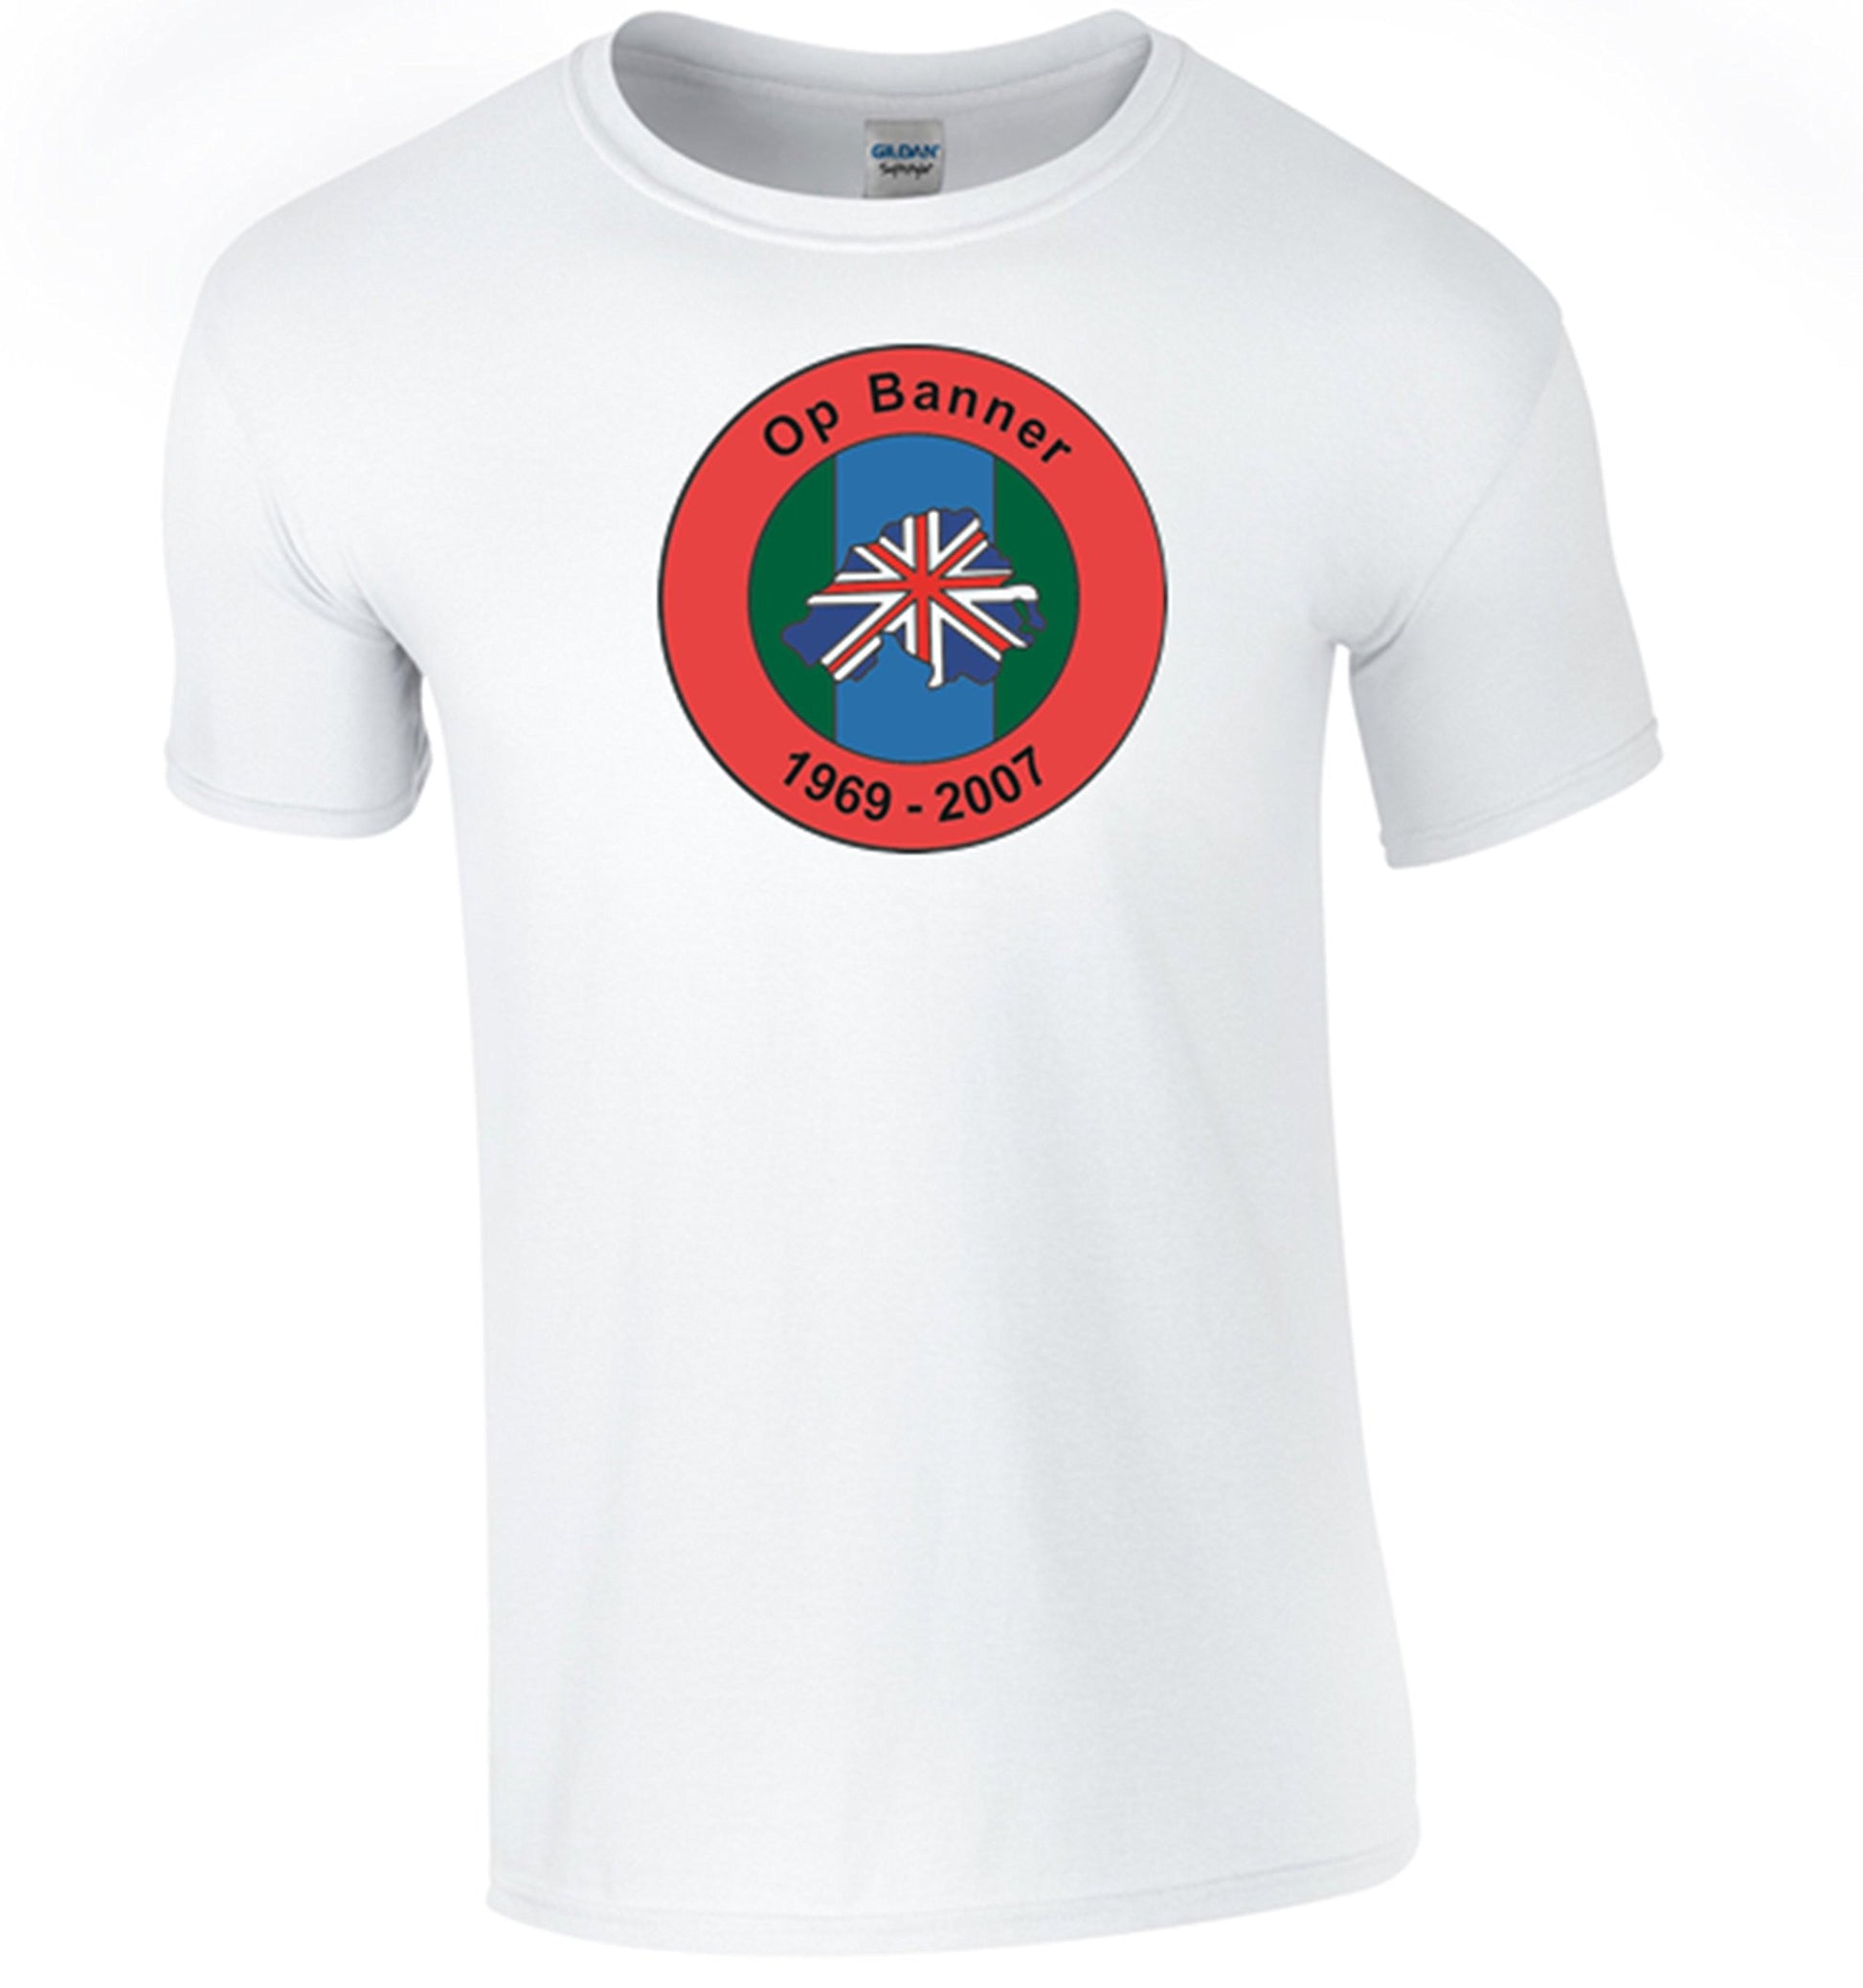 Northern Ireland Ops Banner T-Shirt (M, White) - Army 1157 kit Army 1157 Kit